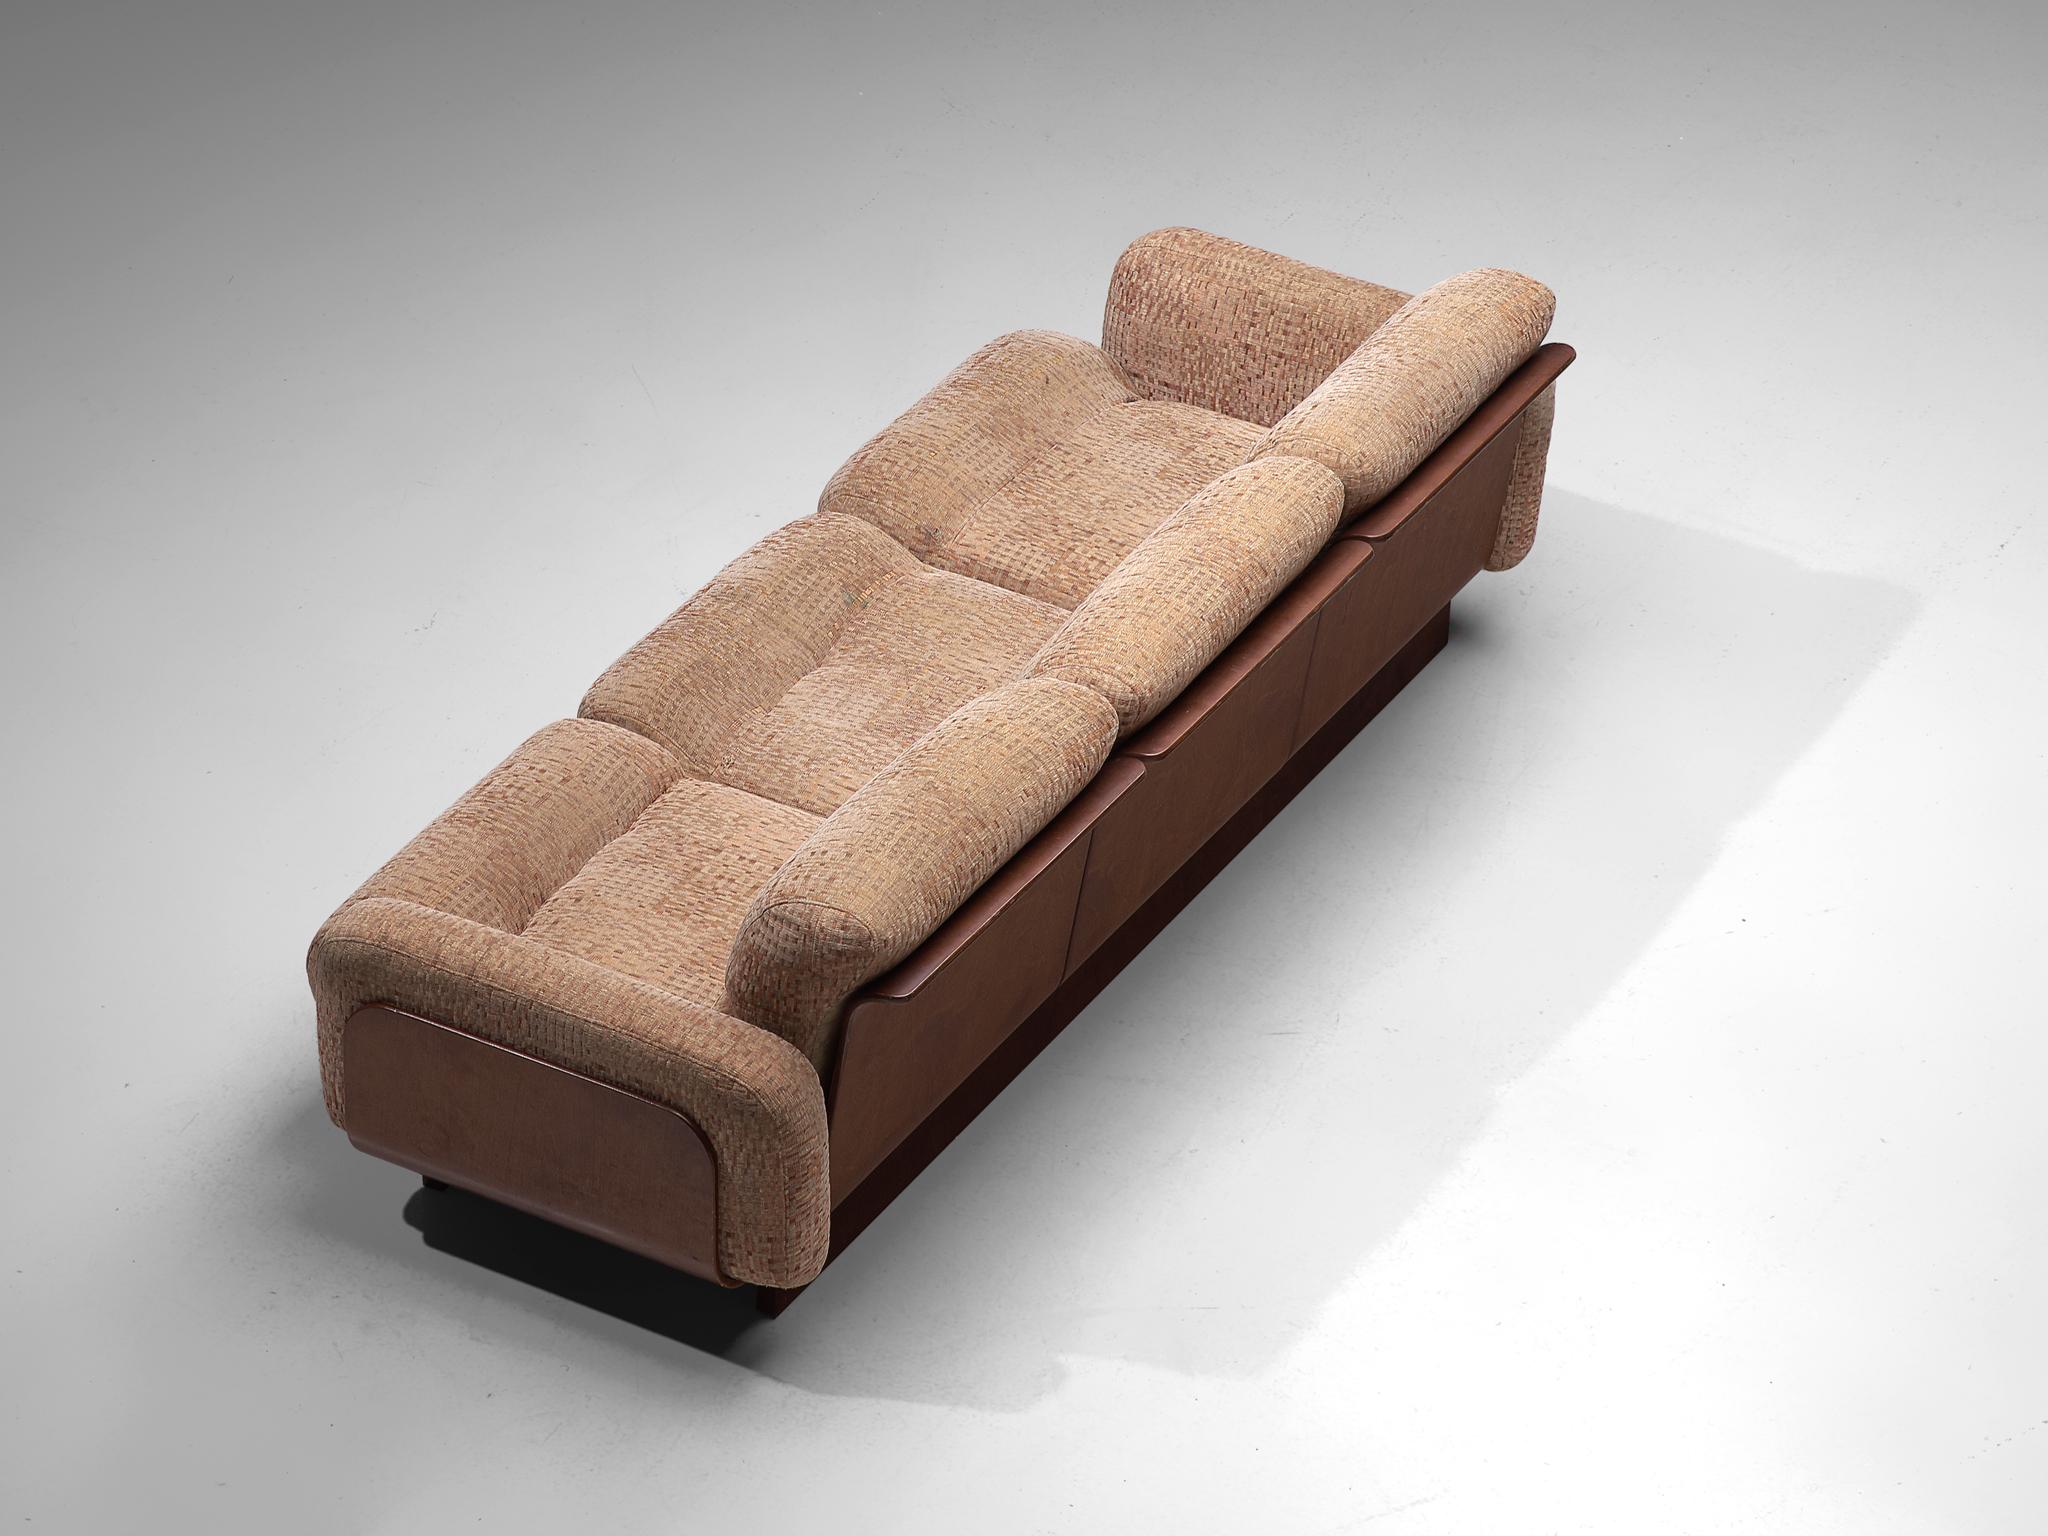 Finnish Sofa in Teak and Patterned Upholstery 1